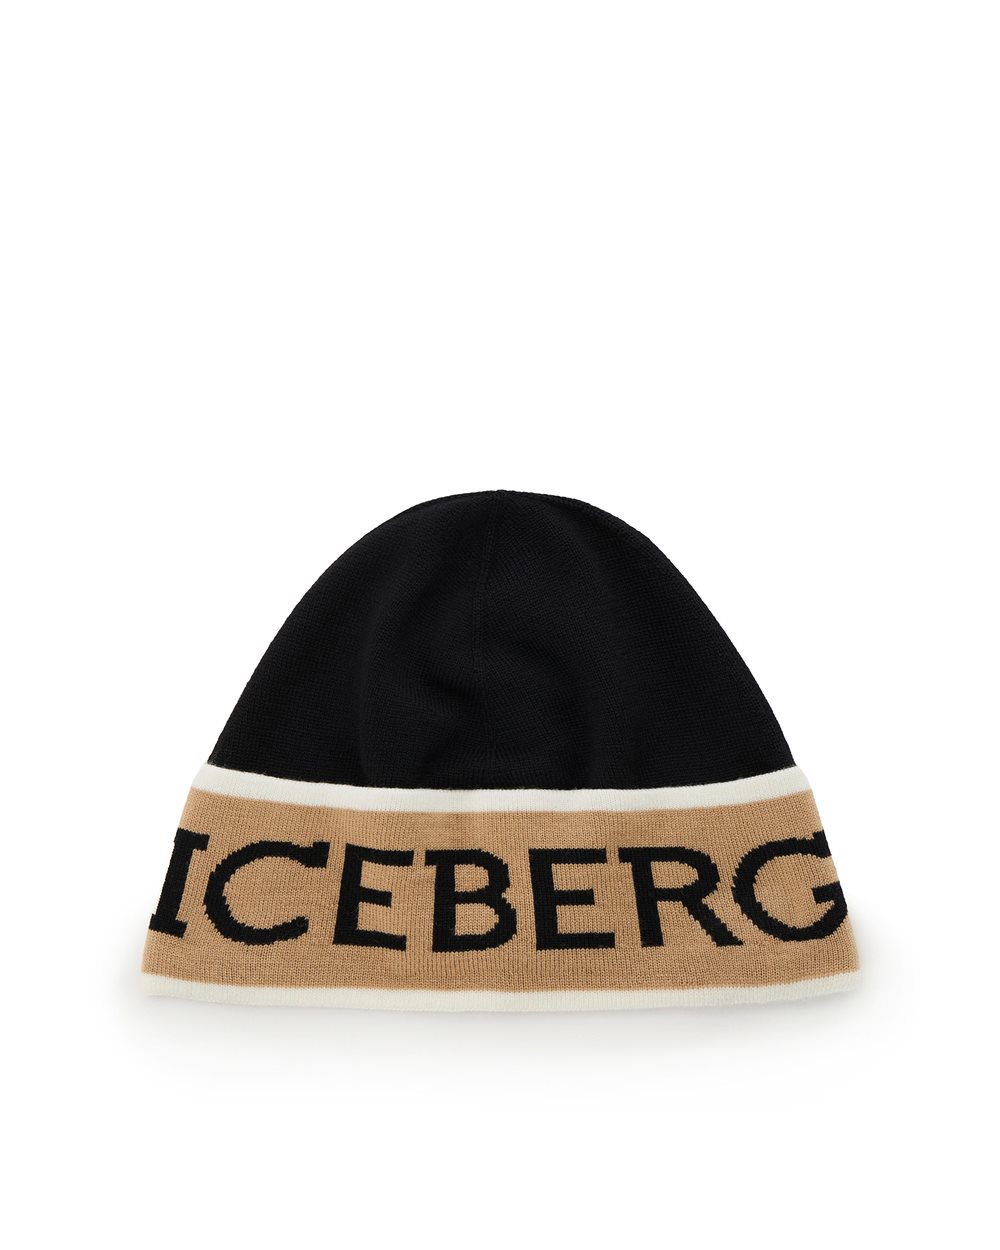 Black wool beanie with logo - ( PRIMO STEP IT ) PROMO SALDI UP TO 40% | Iceberg - Official Website